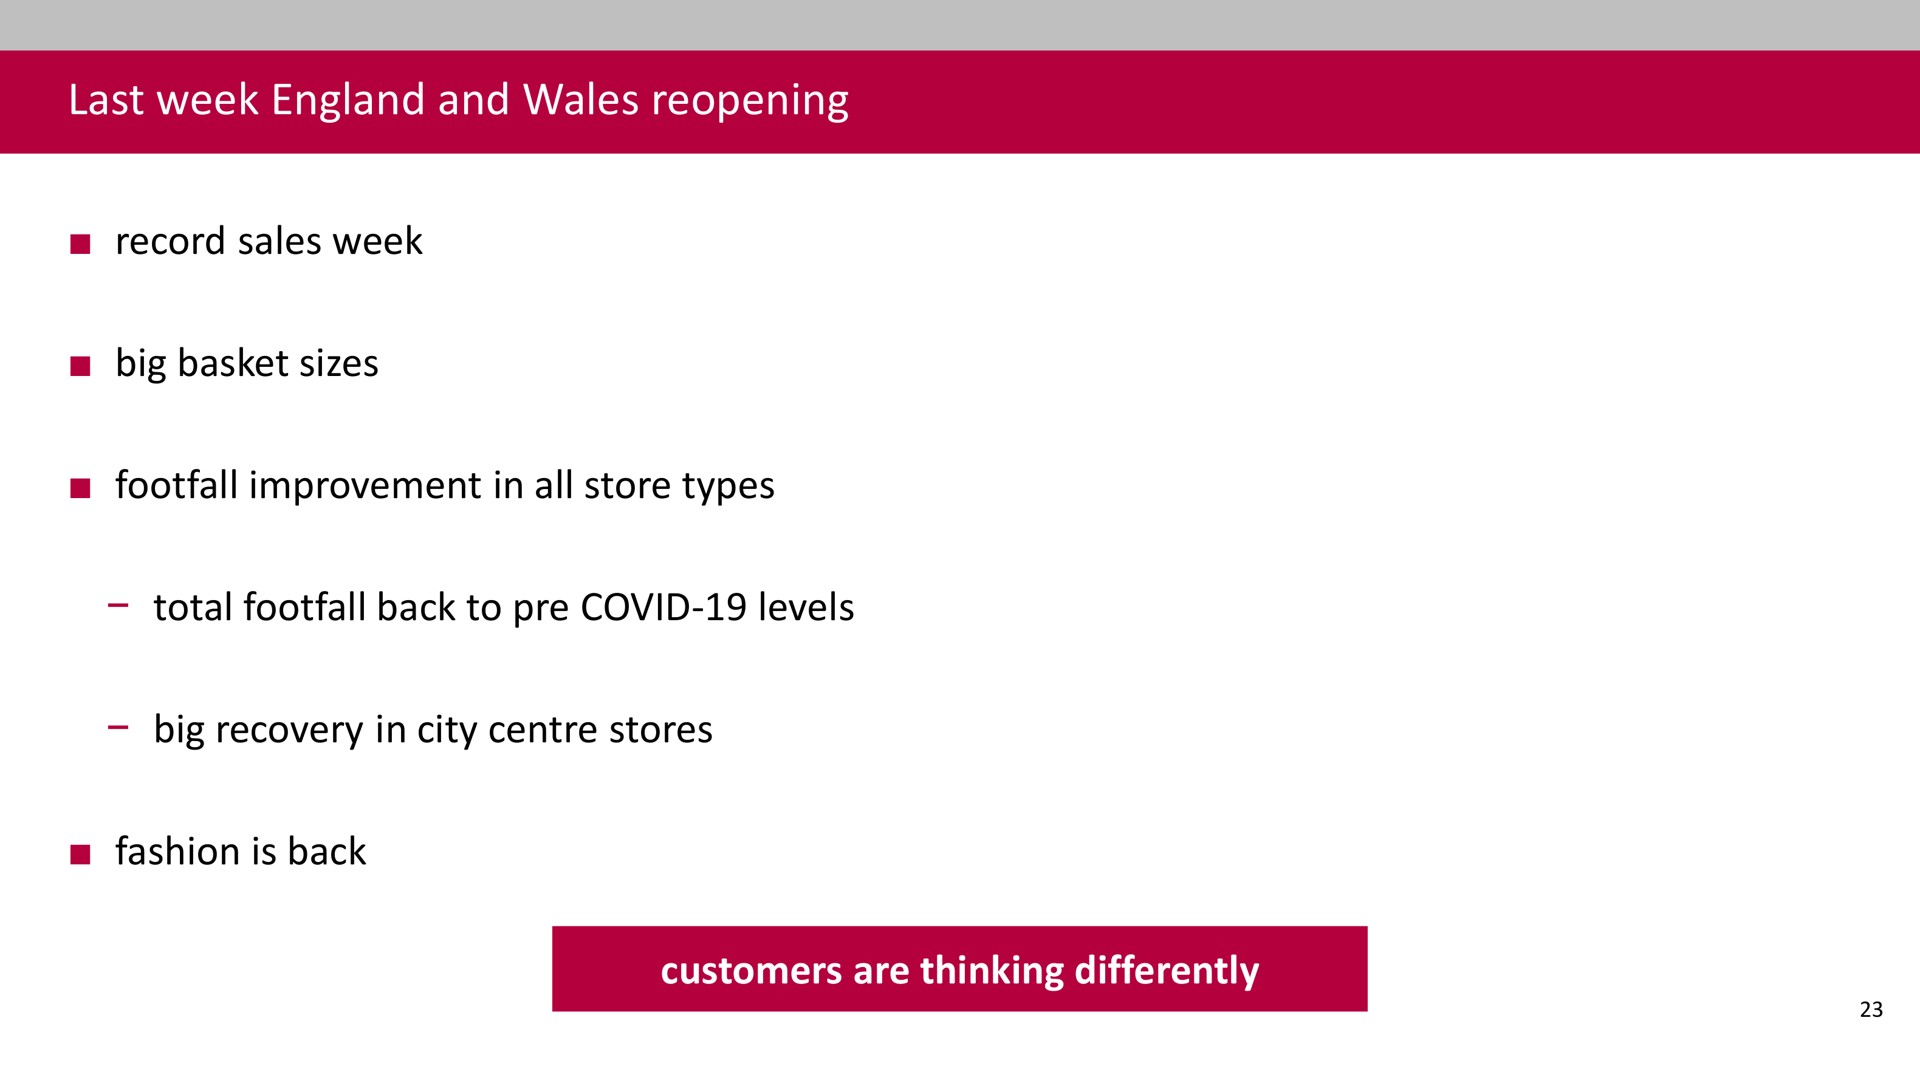 last week and wales reopening record sales week big basket sizes footfall improvement in all store types total footfall back to covid levels big recovery in city stores fashion is back customers are thinking differently | Associated British Foods